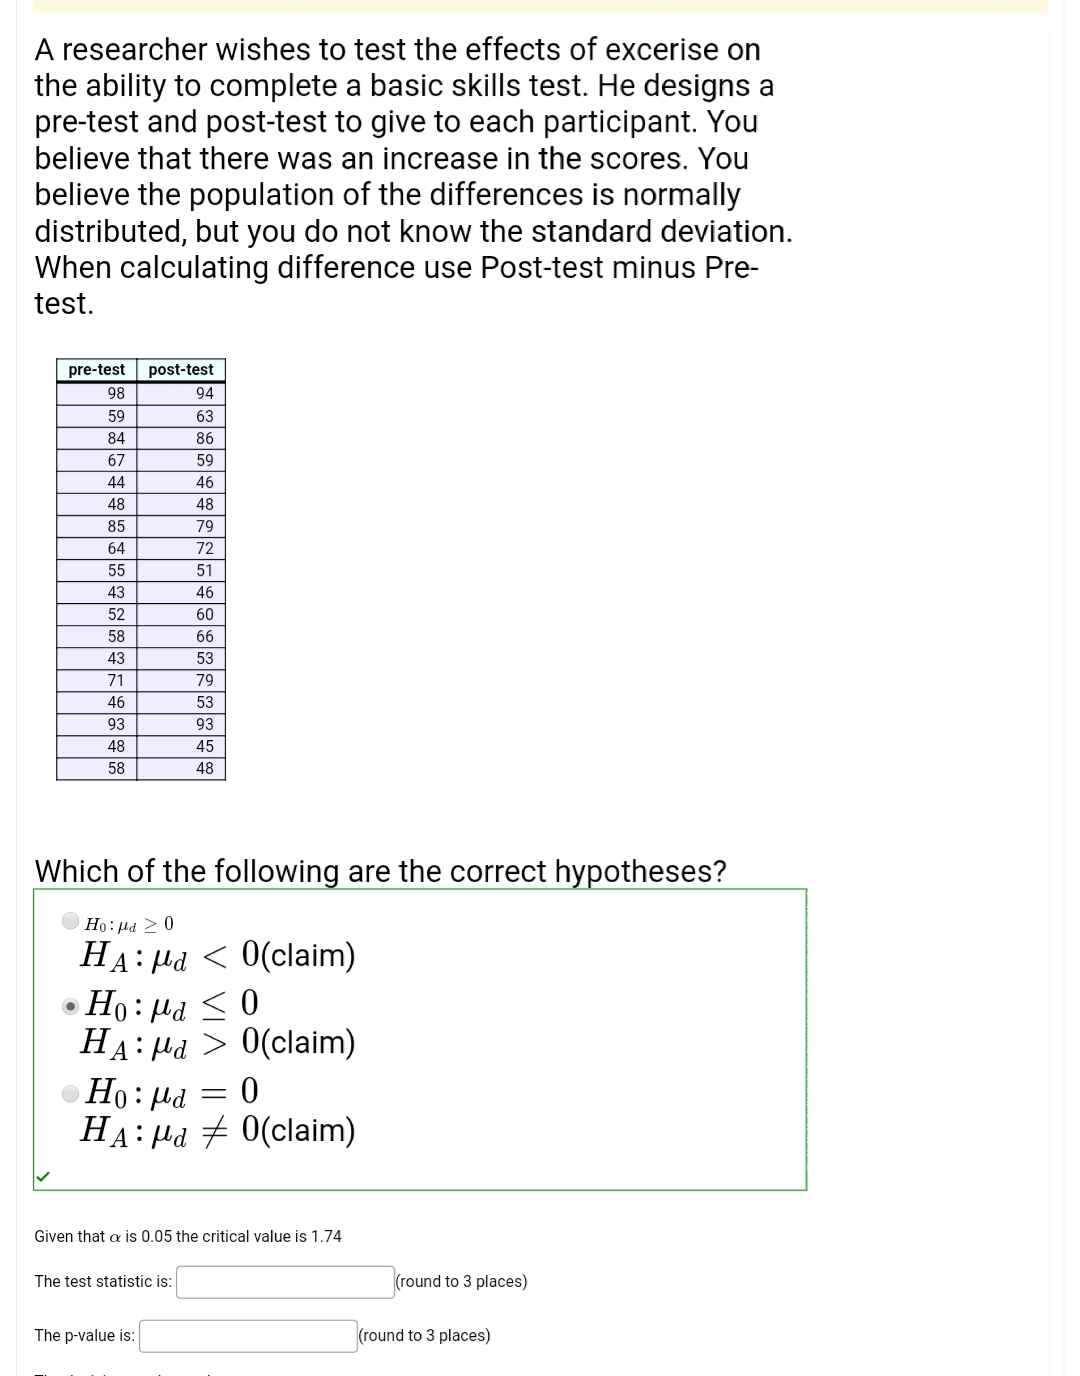 A researcher wishes to test the effects of excerise on
the ability to complete a basic skills test. He designs a
pre-test and post-test to give to each participant. You
believe that there was an increase in the scores. You
believe the population of the differences is normally
distributed, but you do not know the standard deviation.
When calculating difference use Post-test minus Pre-
test.
pre-test
post-test
98
94
59
63
84
86
67
59
44
46
48
48
85
79
64
72
55
51
43
46
52
60
58
66
43
53
71
79
46
53
93
93
48
45
58
48
Which of the following are the correct hypotheses?
Но: ра > 0
HA: Hd < 0(claim)
0 > Prl :0H
HA: Hd > 0(claim)
Но: Ра
HA: Hd 7 0(claim)
Given that a is 0.05 the critical value is 1.74
The test statistic is:
(round to 3 places)
The p-value is:
(round to 3 places)
